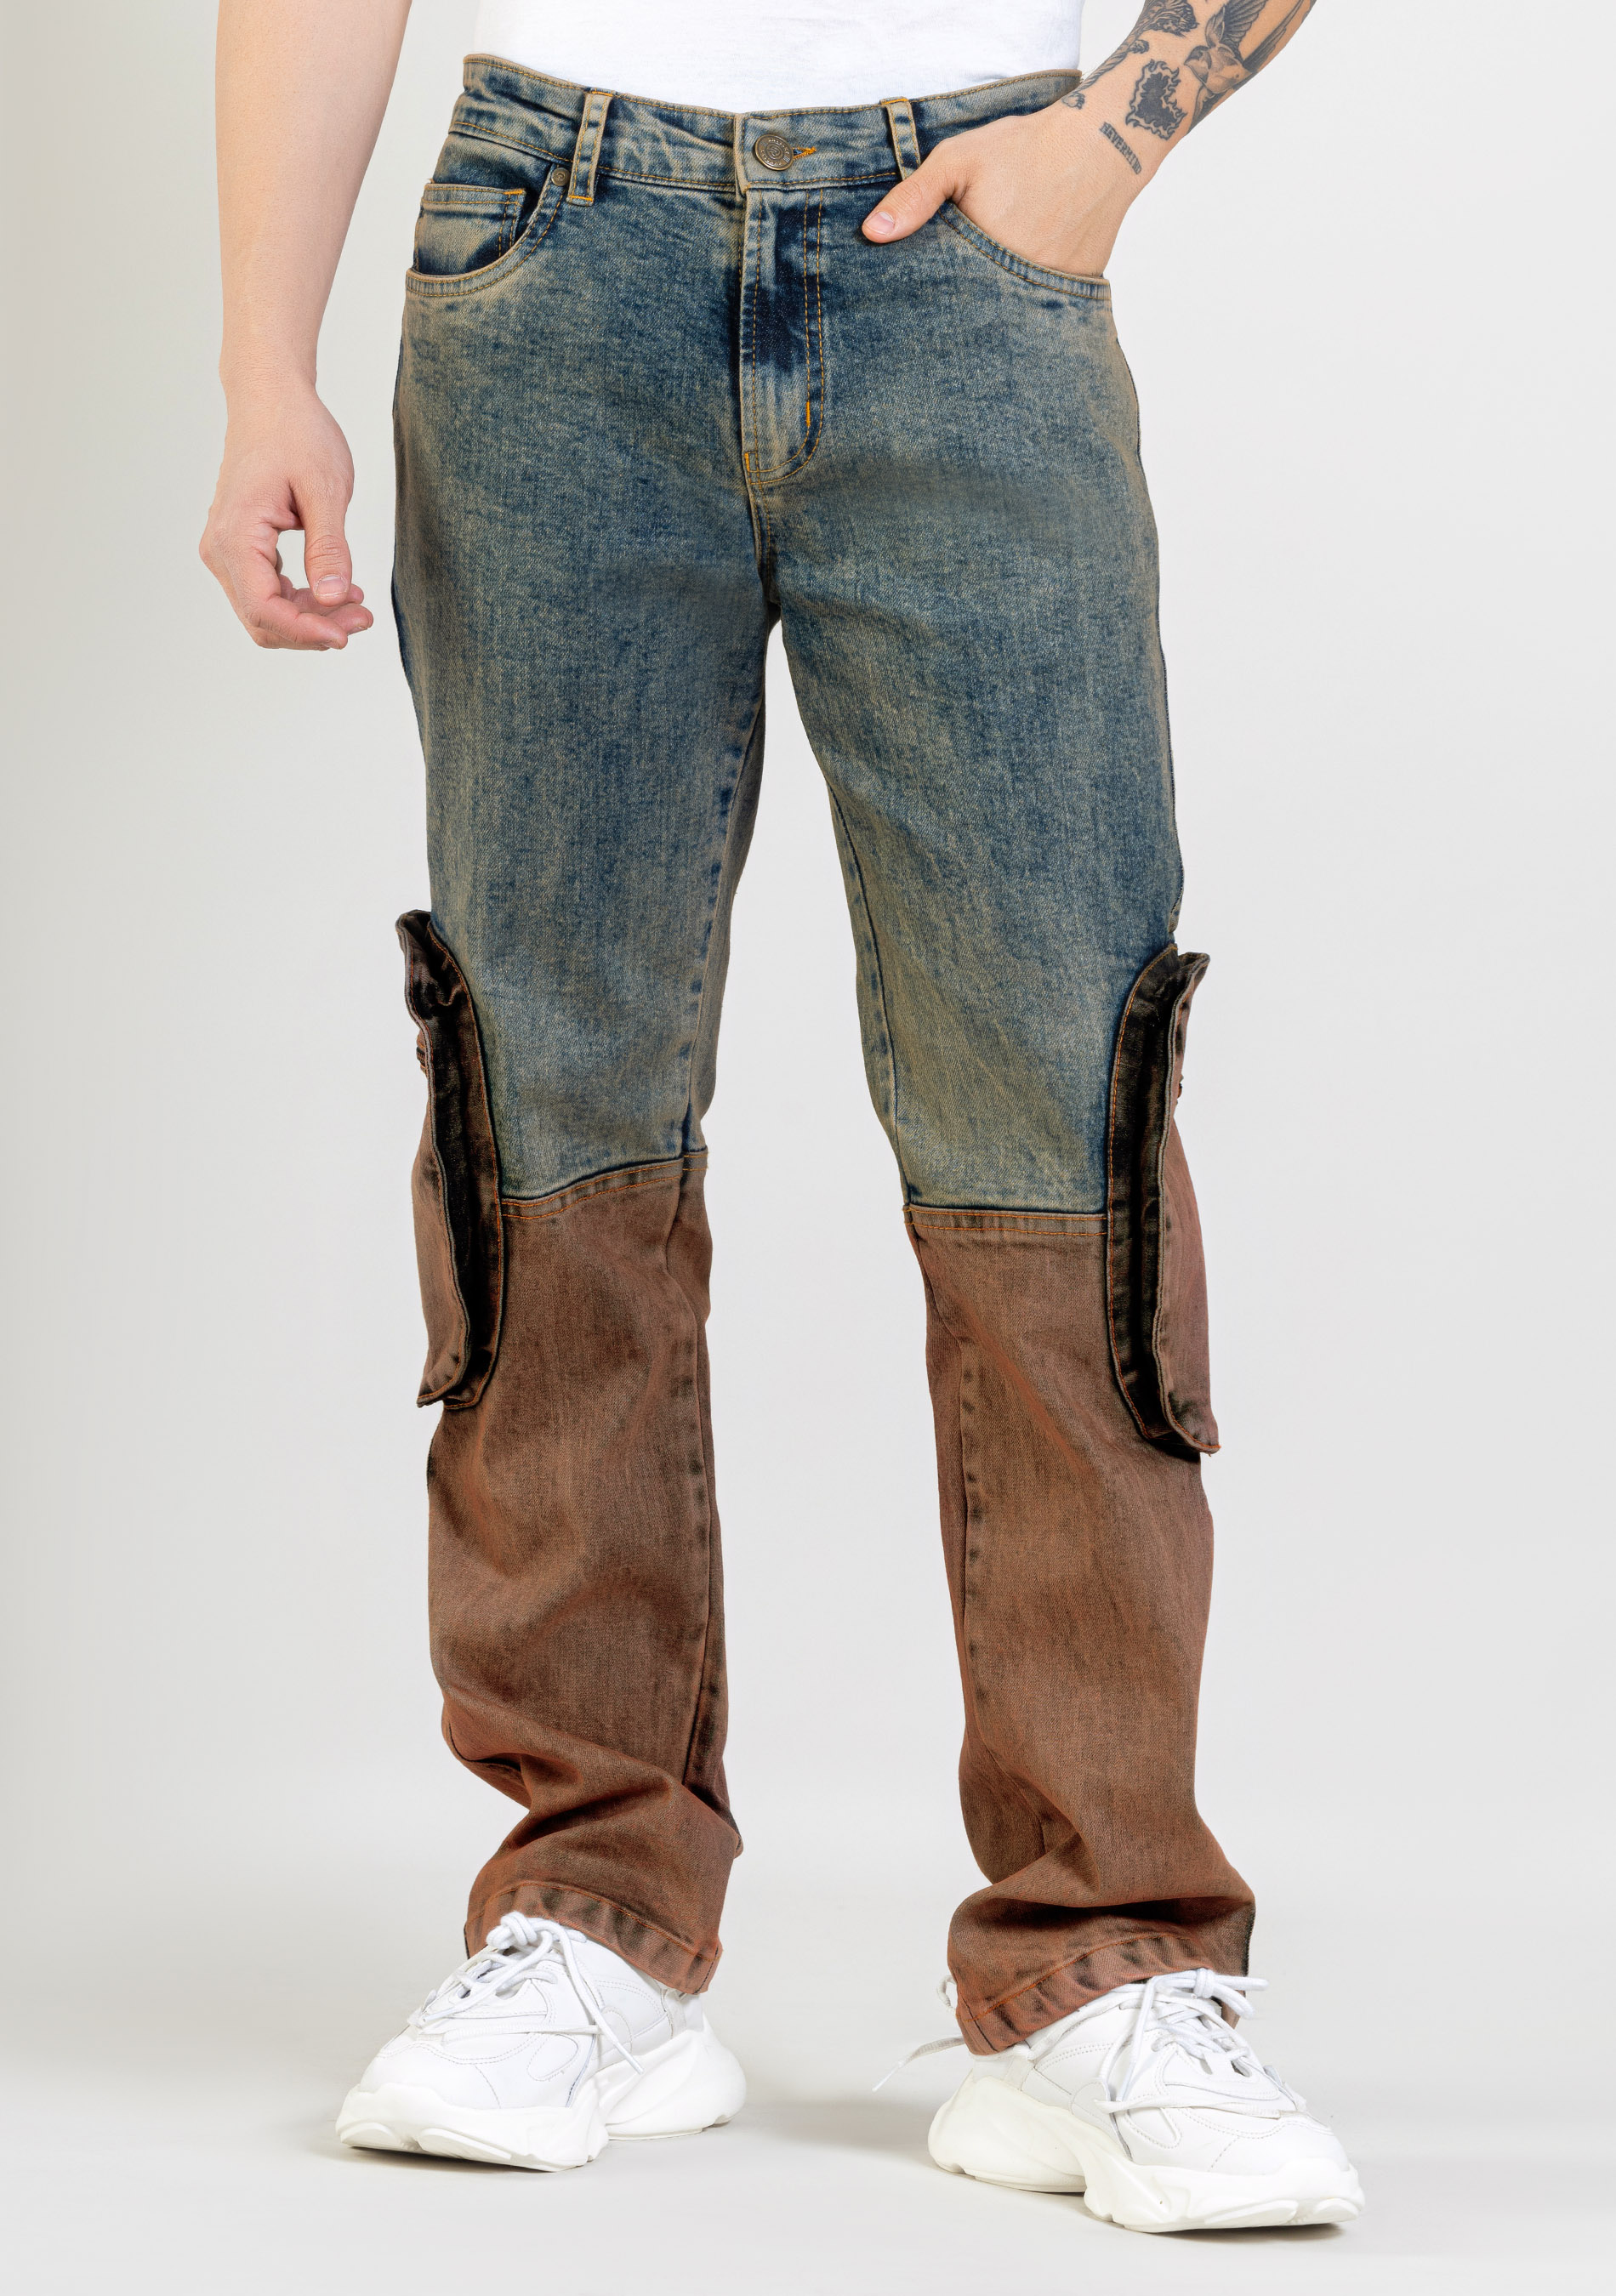 Two Tone Boot Cut Men's Fashion Jeans - Buy Online in India @ Mehar